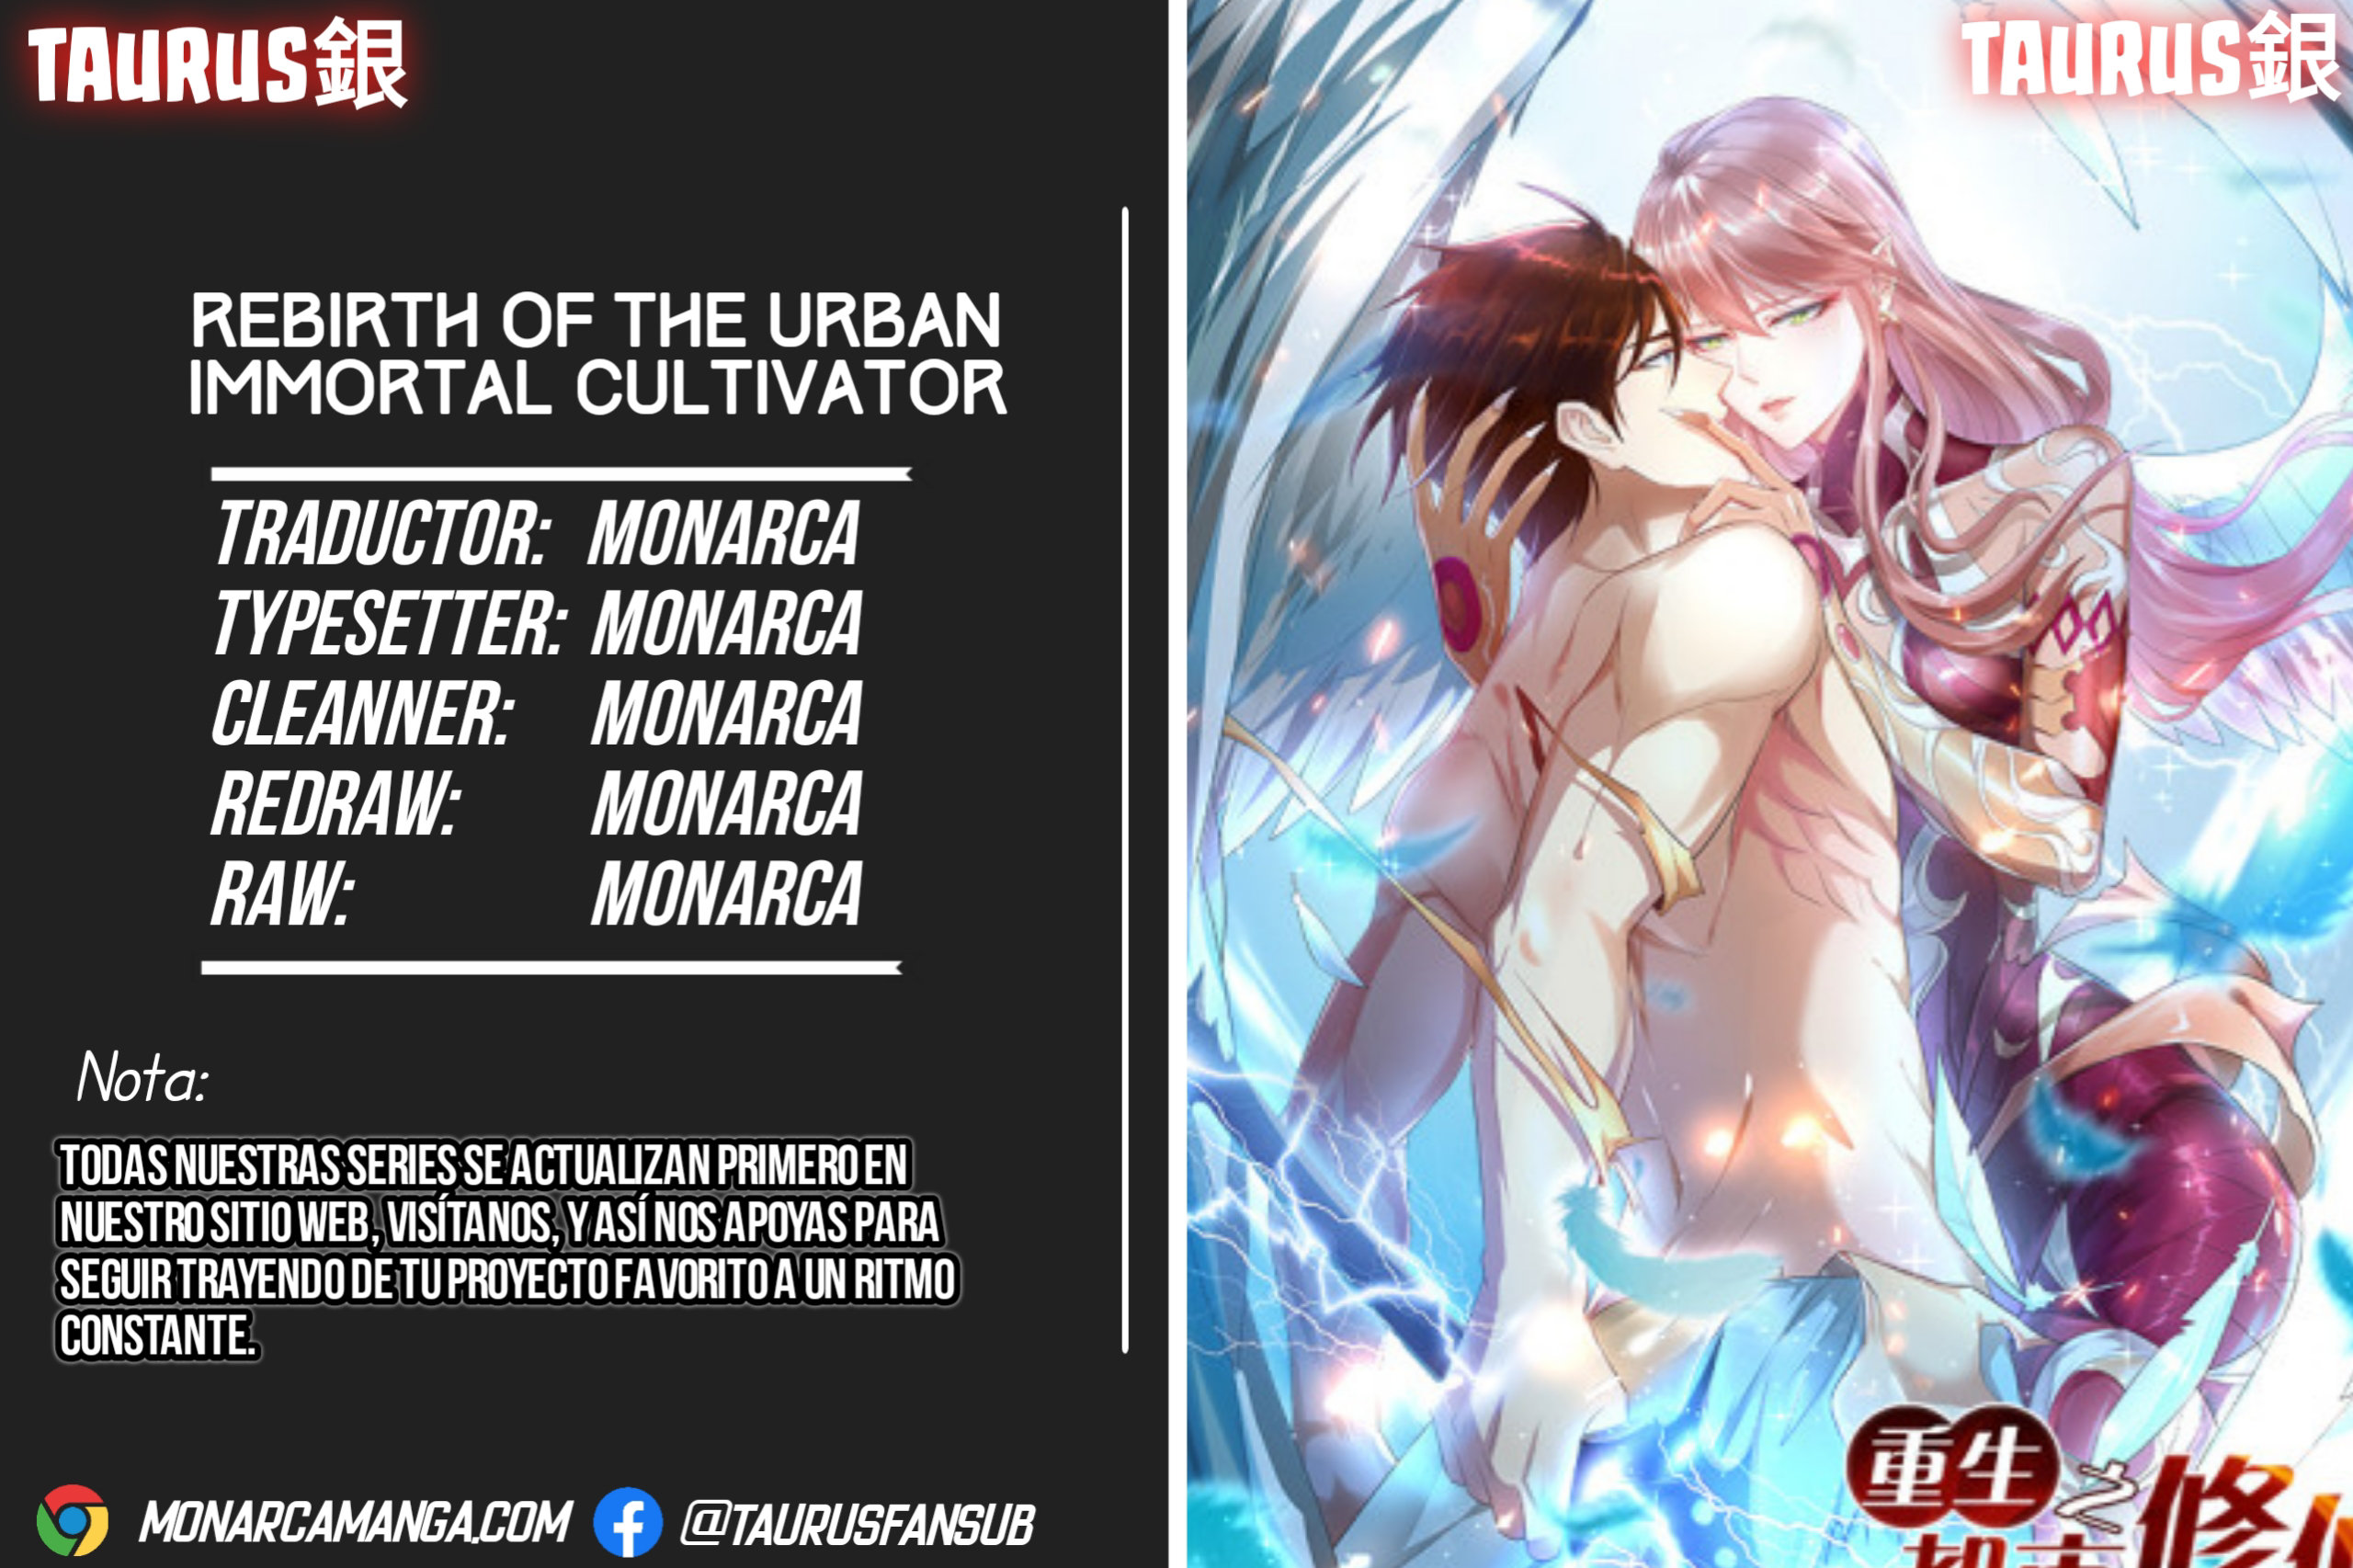 Manga Rebirth Of The Urban Immortal Cultivator Chapter 700 image number 9